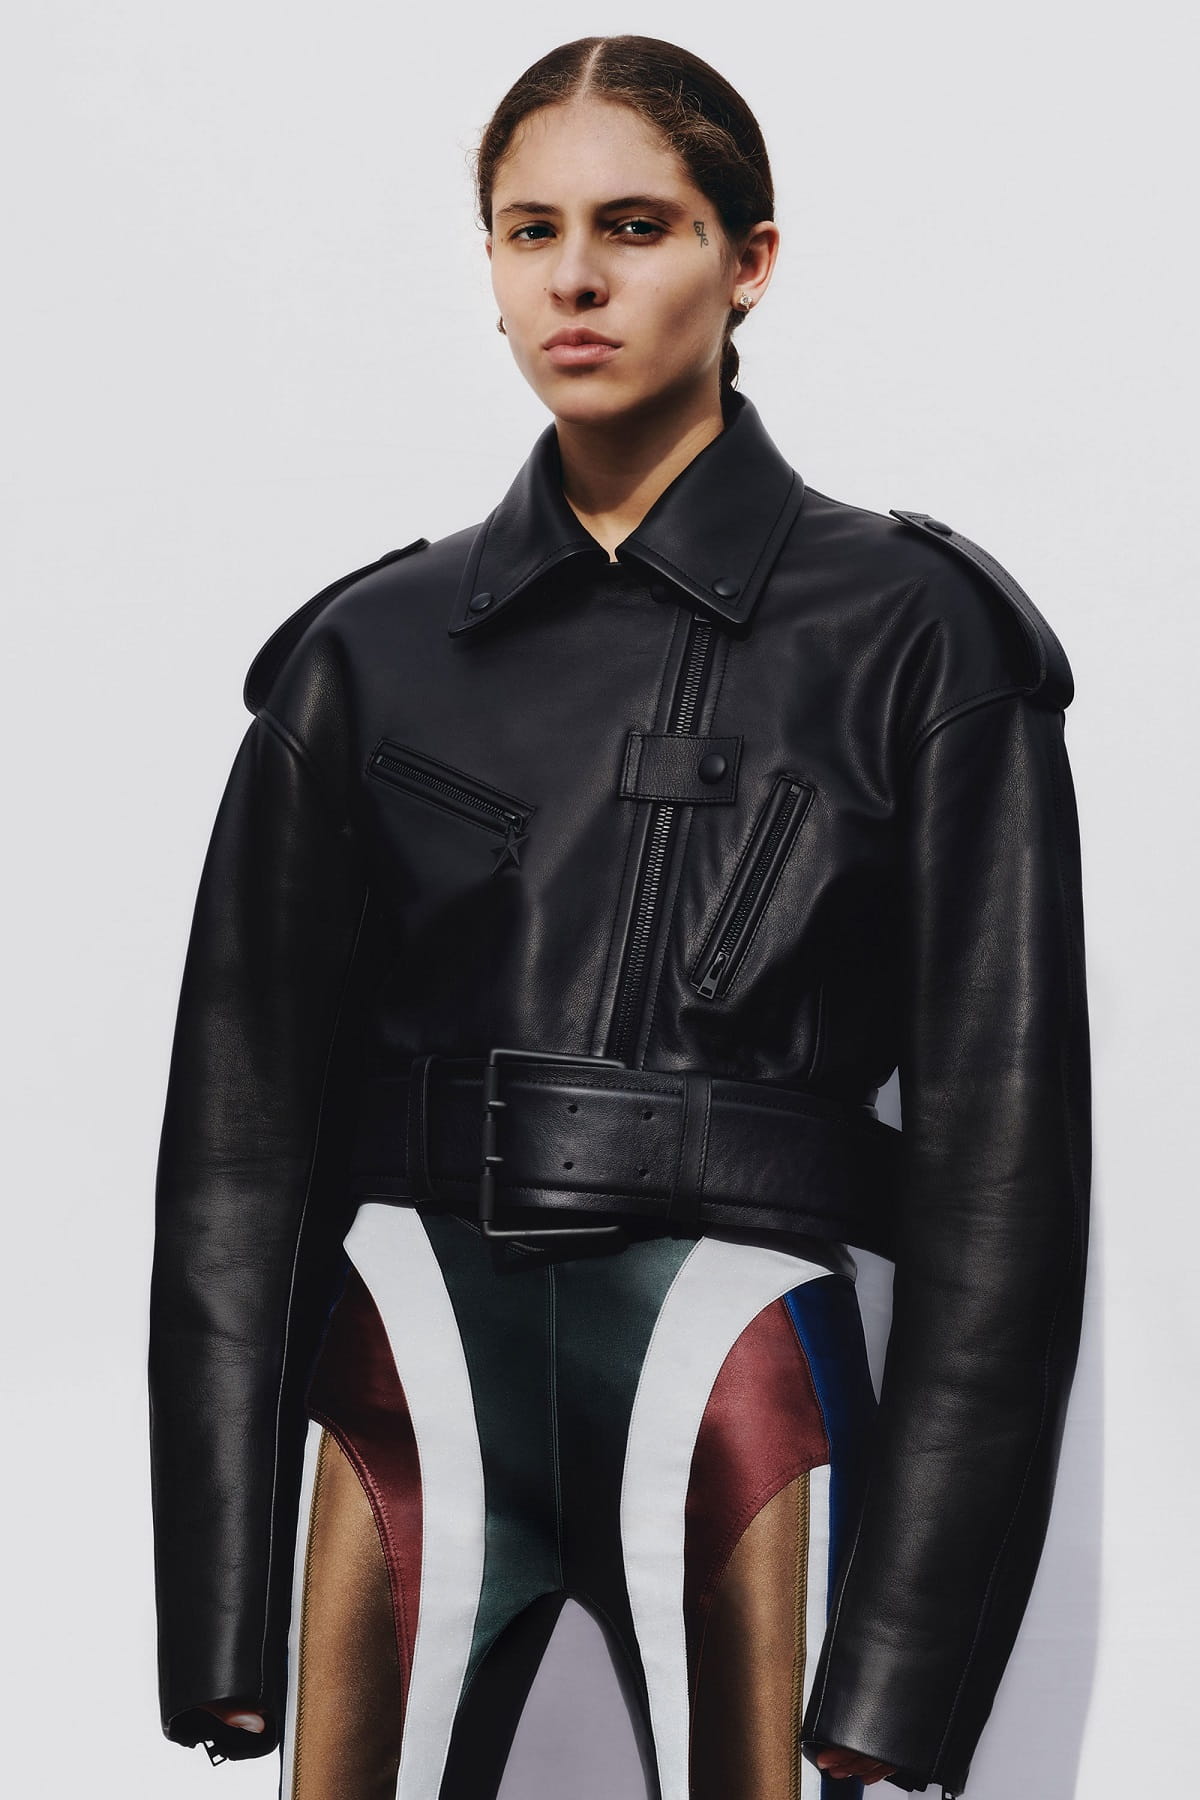 Danielle Balbuena 070 Shake by Arnaud Lajeunie for Mugler Fall 2018 Leather Jacket - Casey Cadwallader